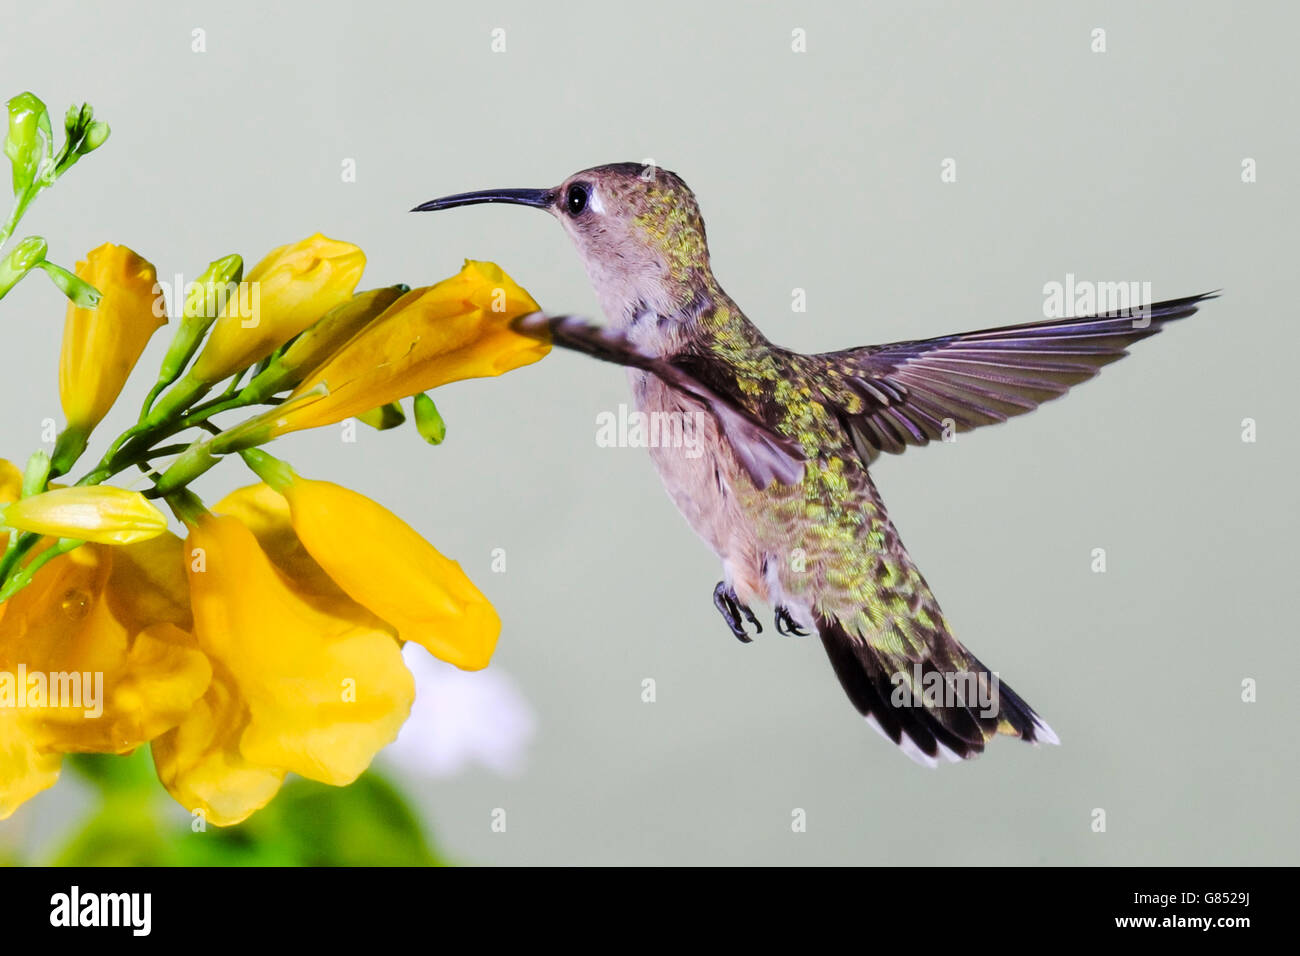 Black-chinned hummingbird Archilochus alexandri female hovering in flight and about to sip nectar from yellow bell flowers Stock Photo